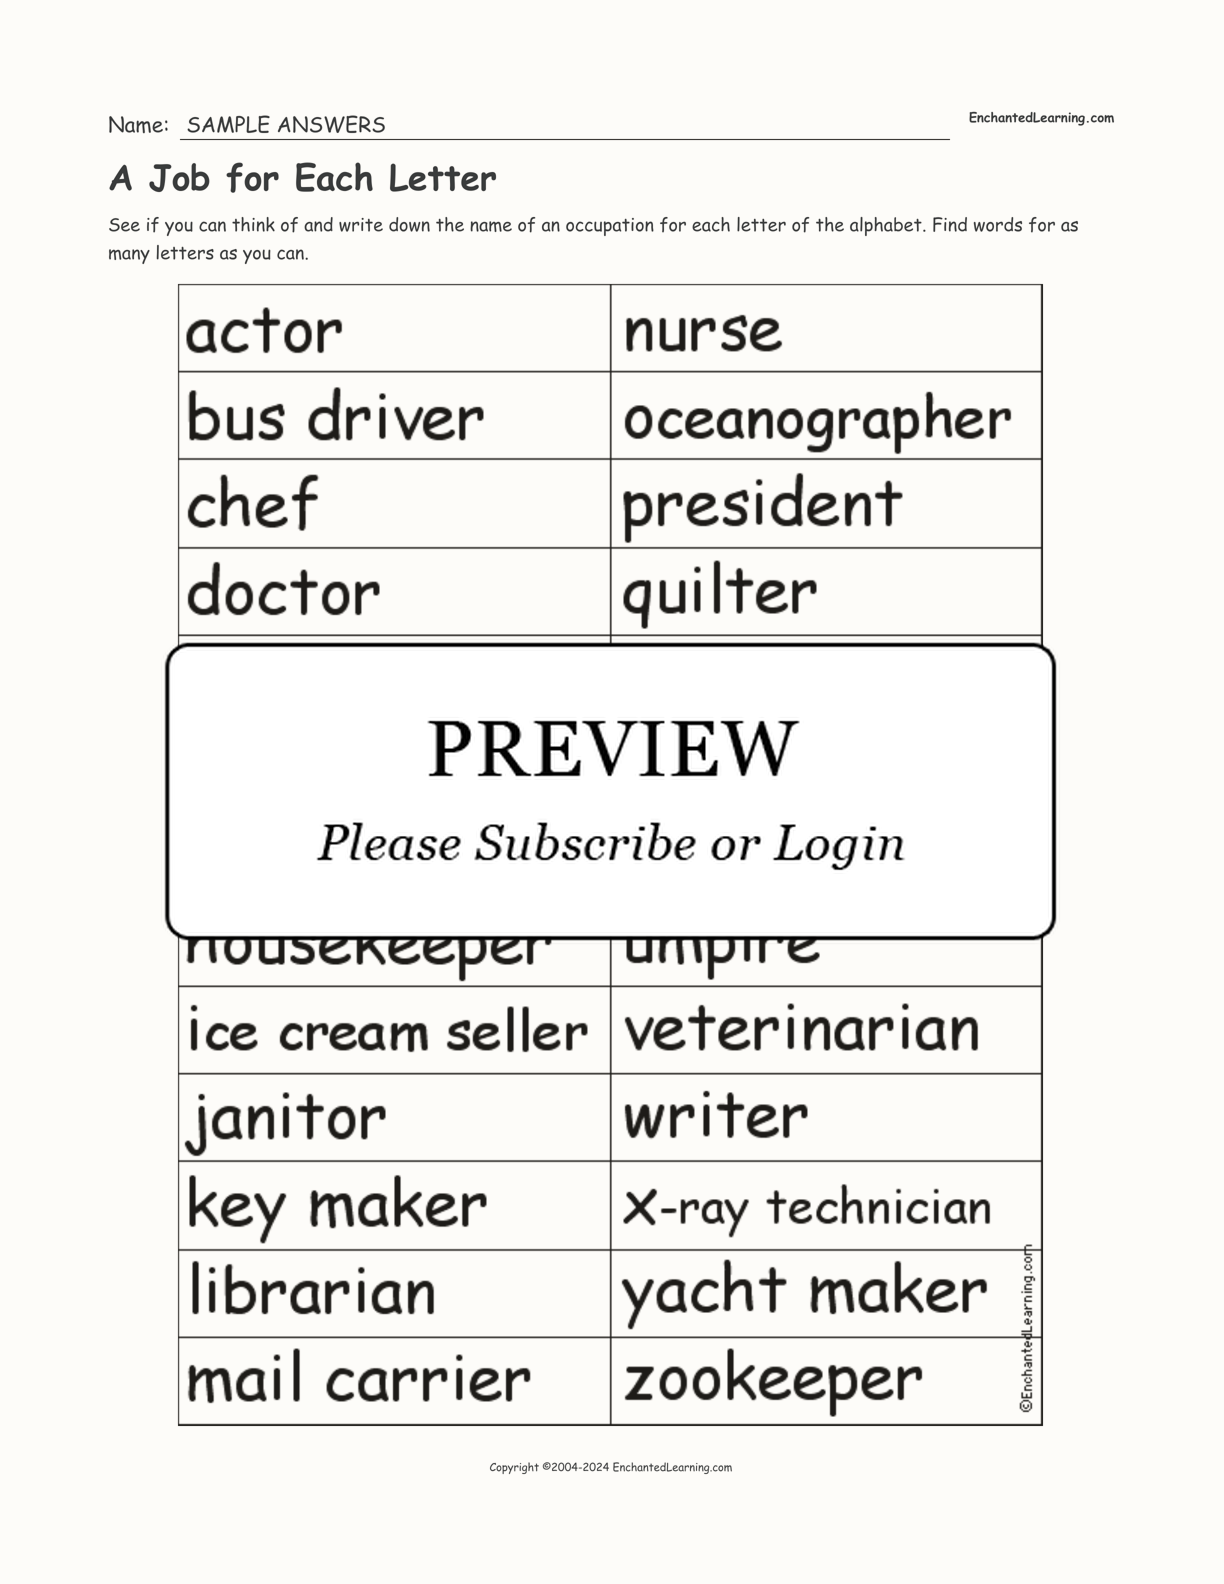 A Job for Each Letter interactive worksheet page 2